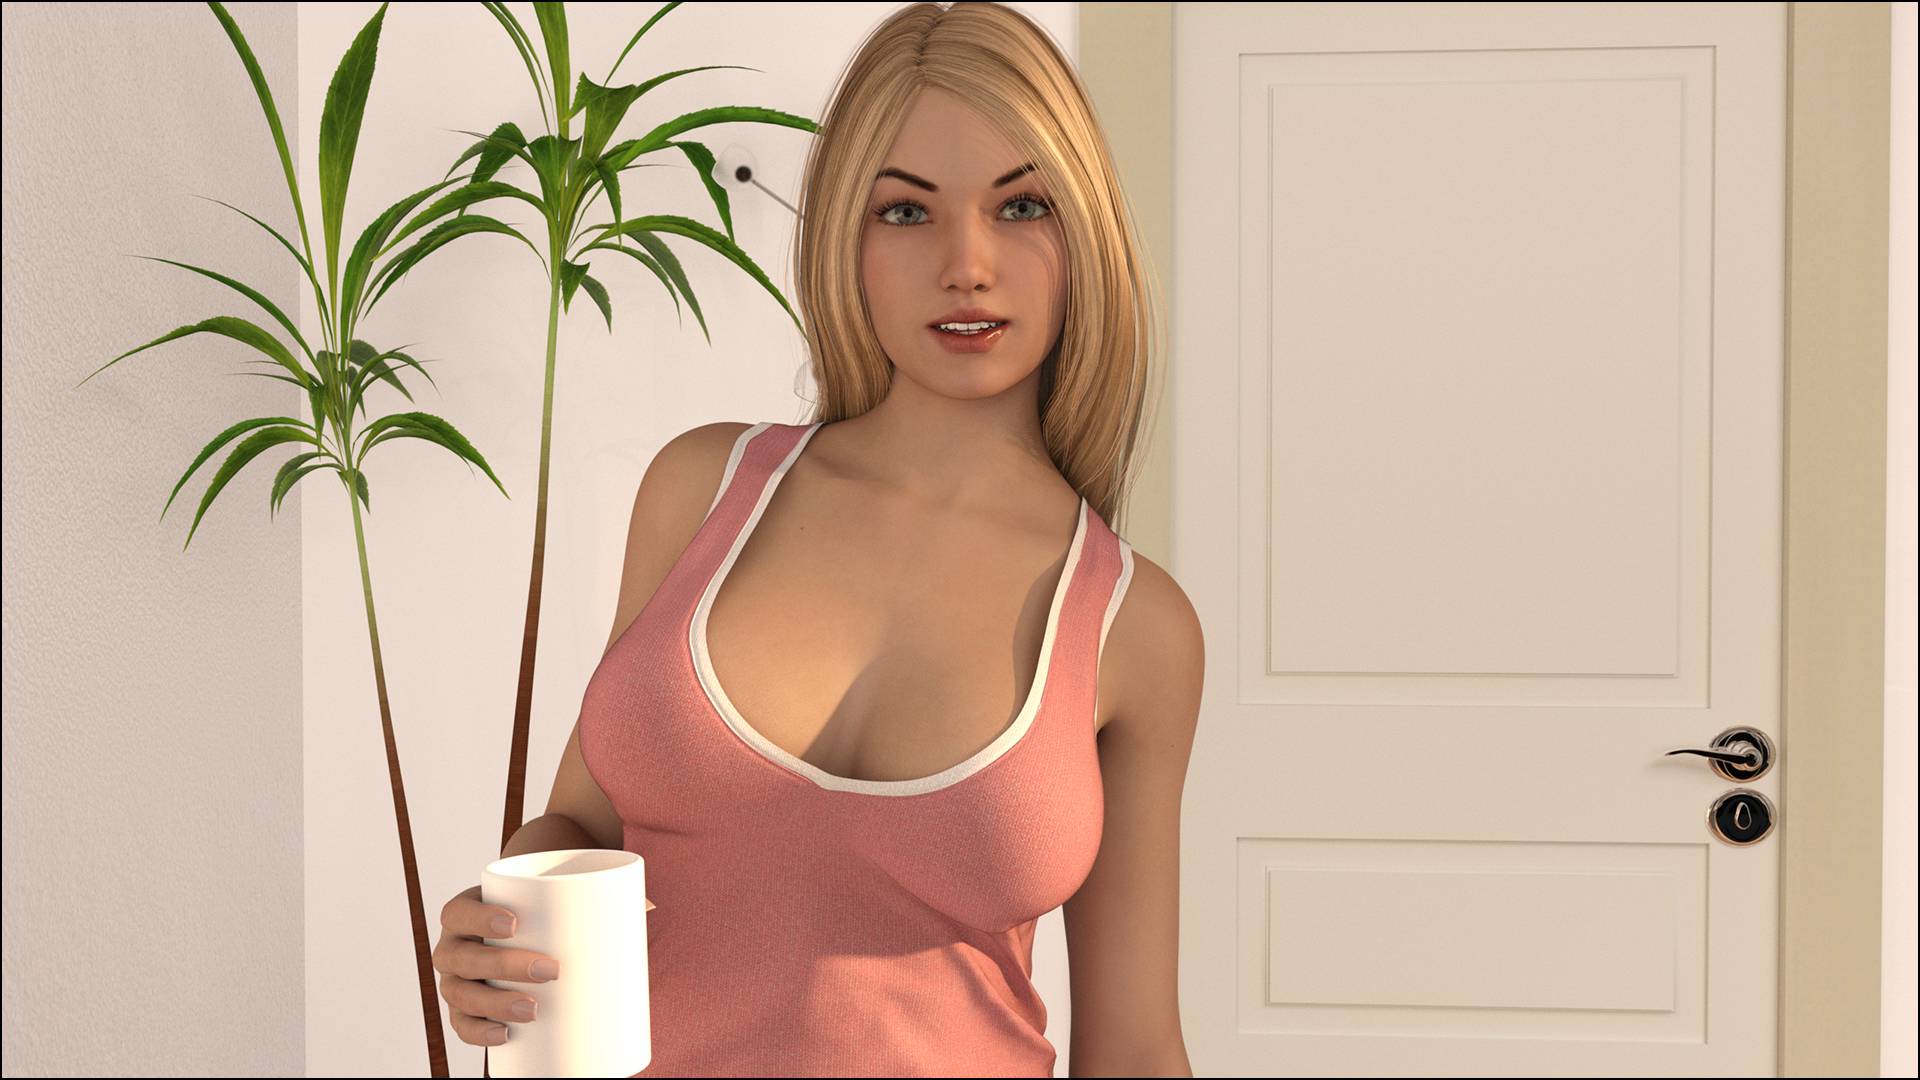 Go on a virtual date with the seductive zmeenaorr